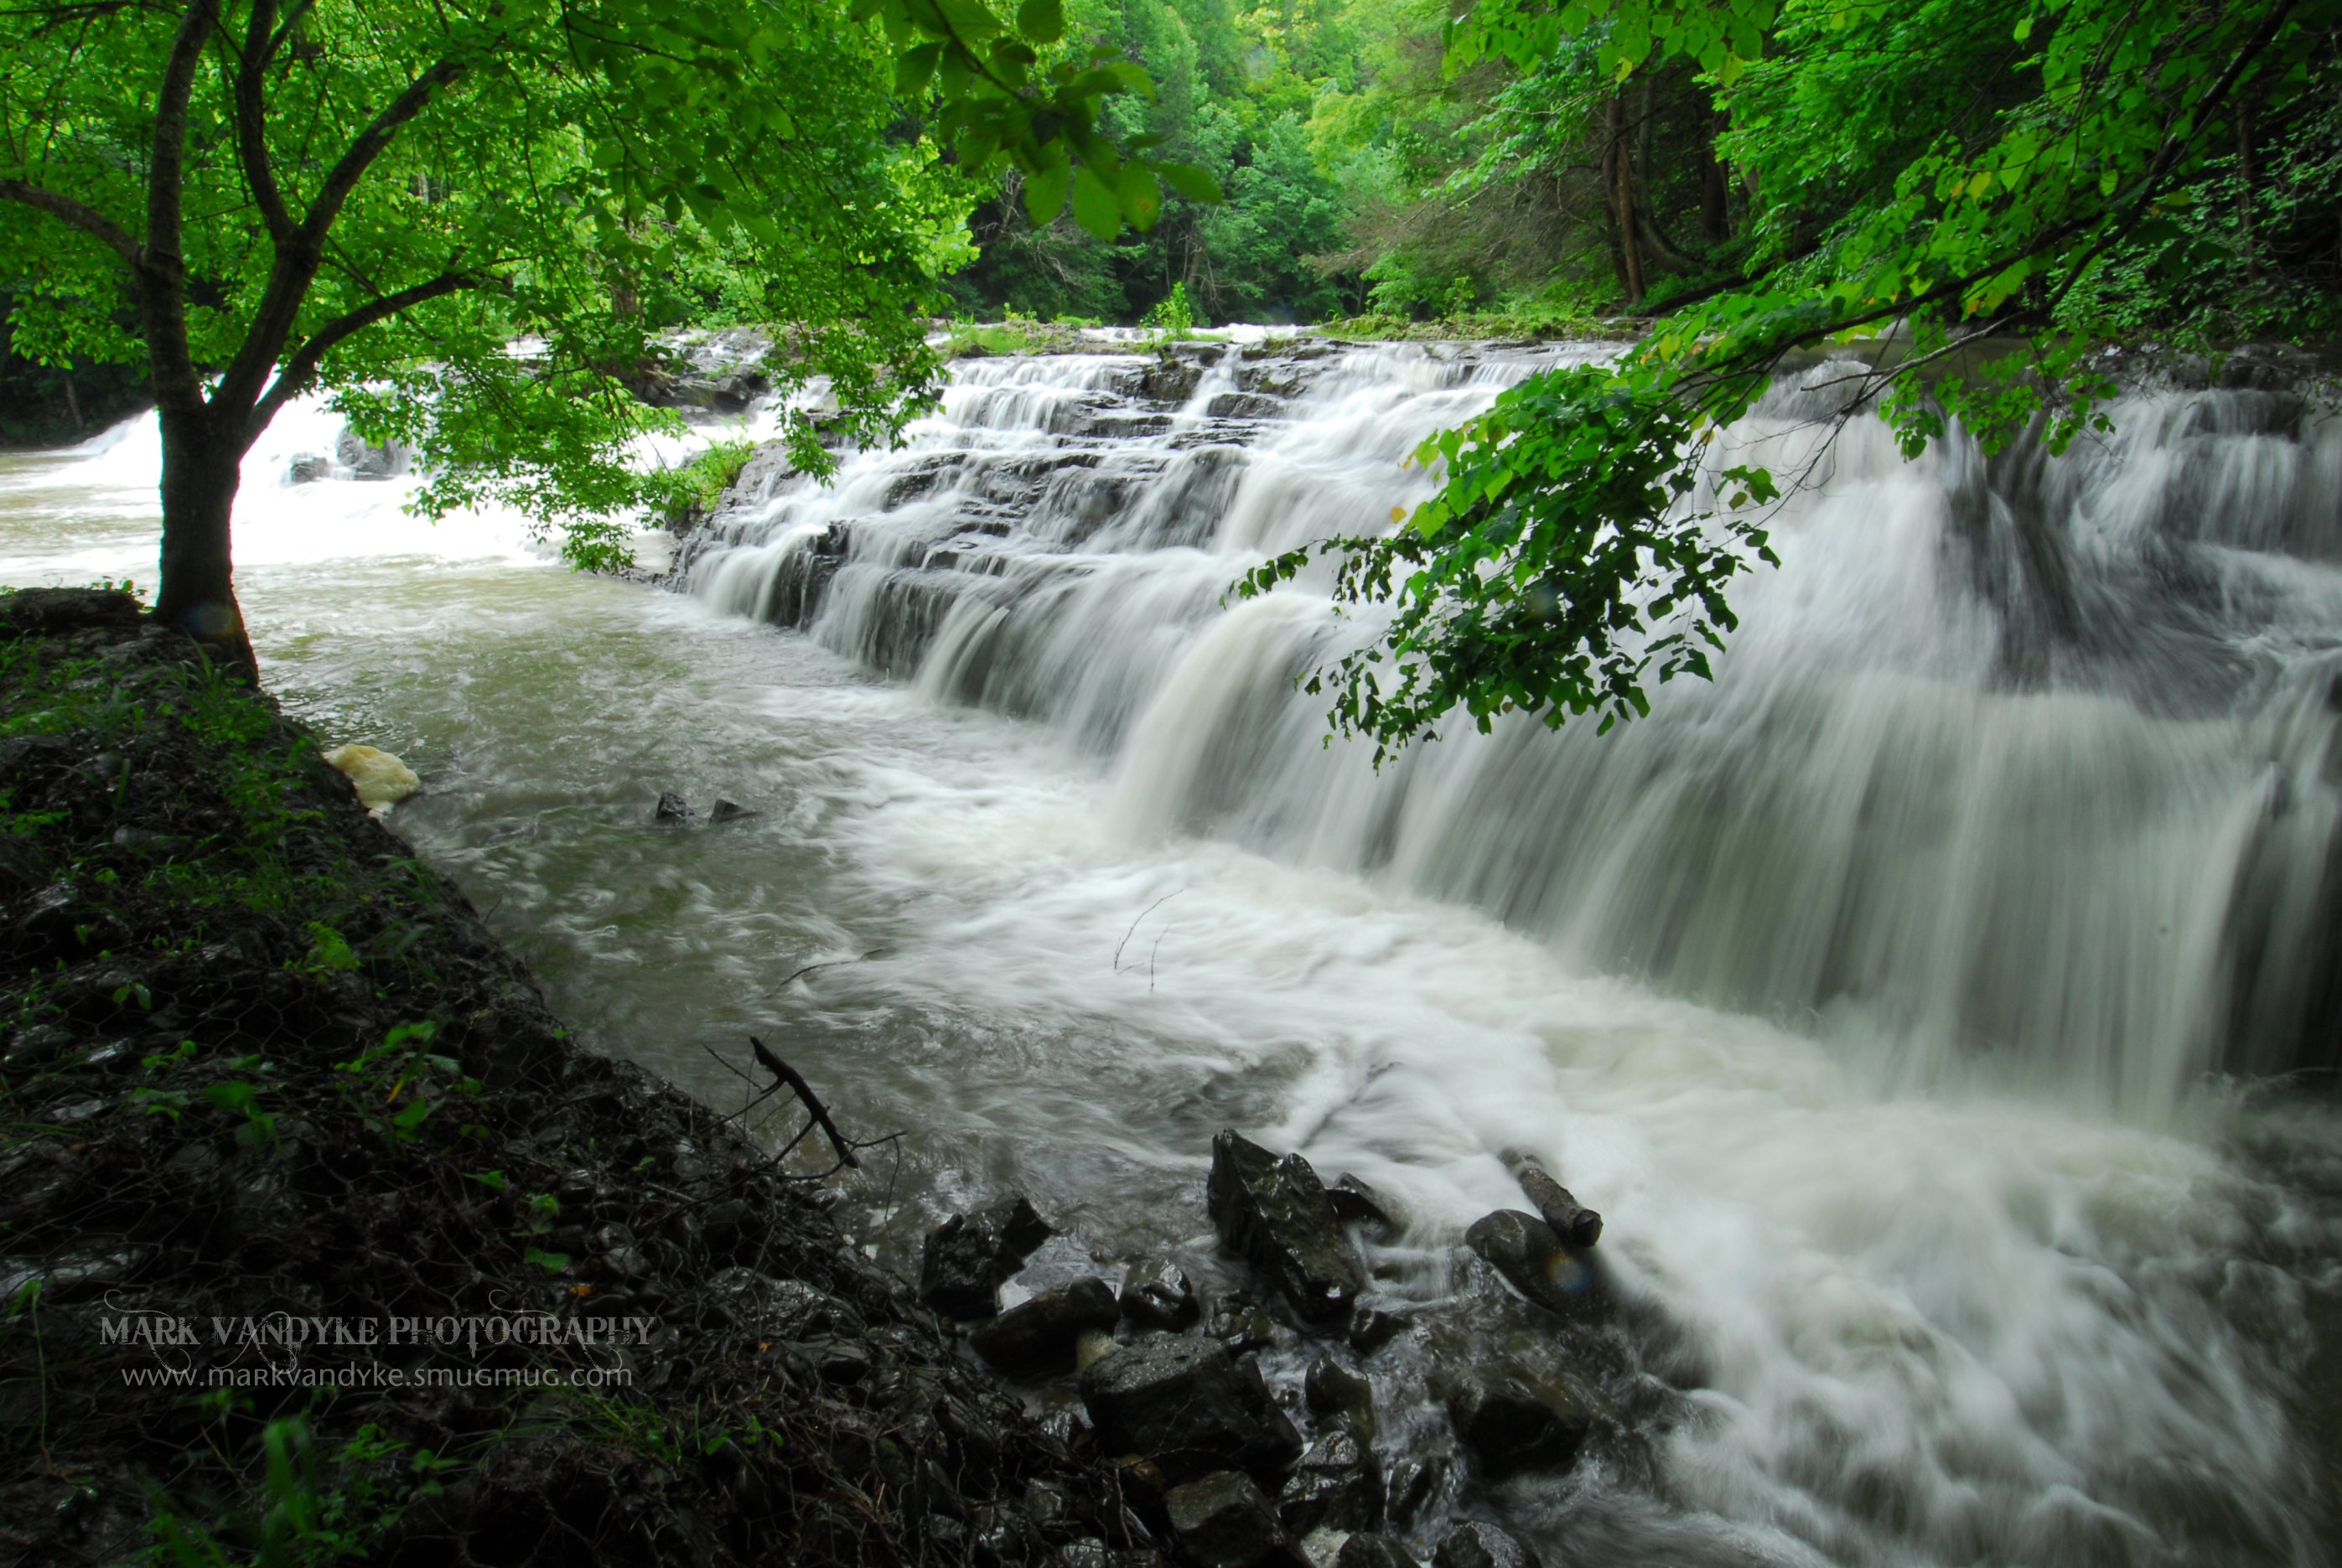 White water rushes over a series of low falls, pooling and swirling around rocks in the river bed. 